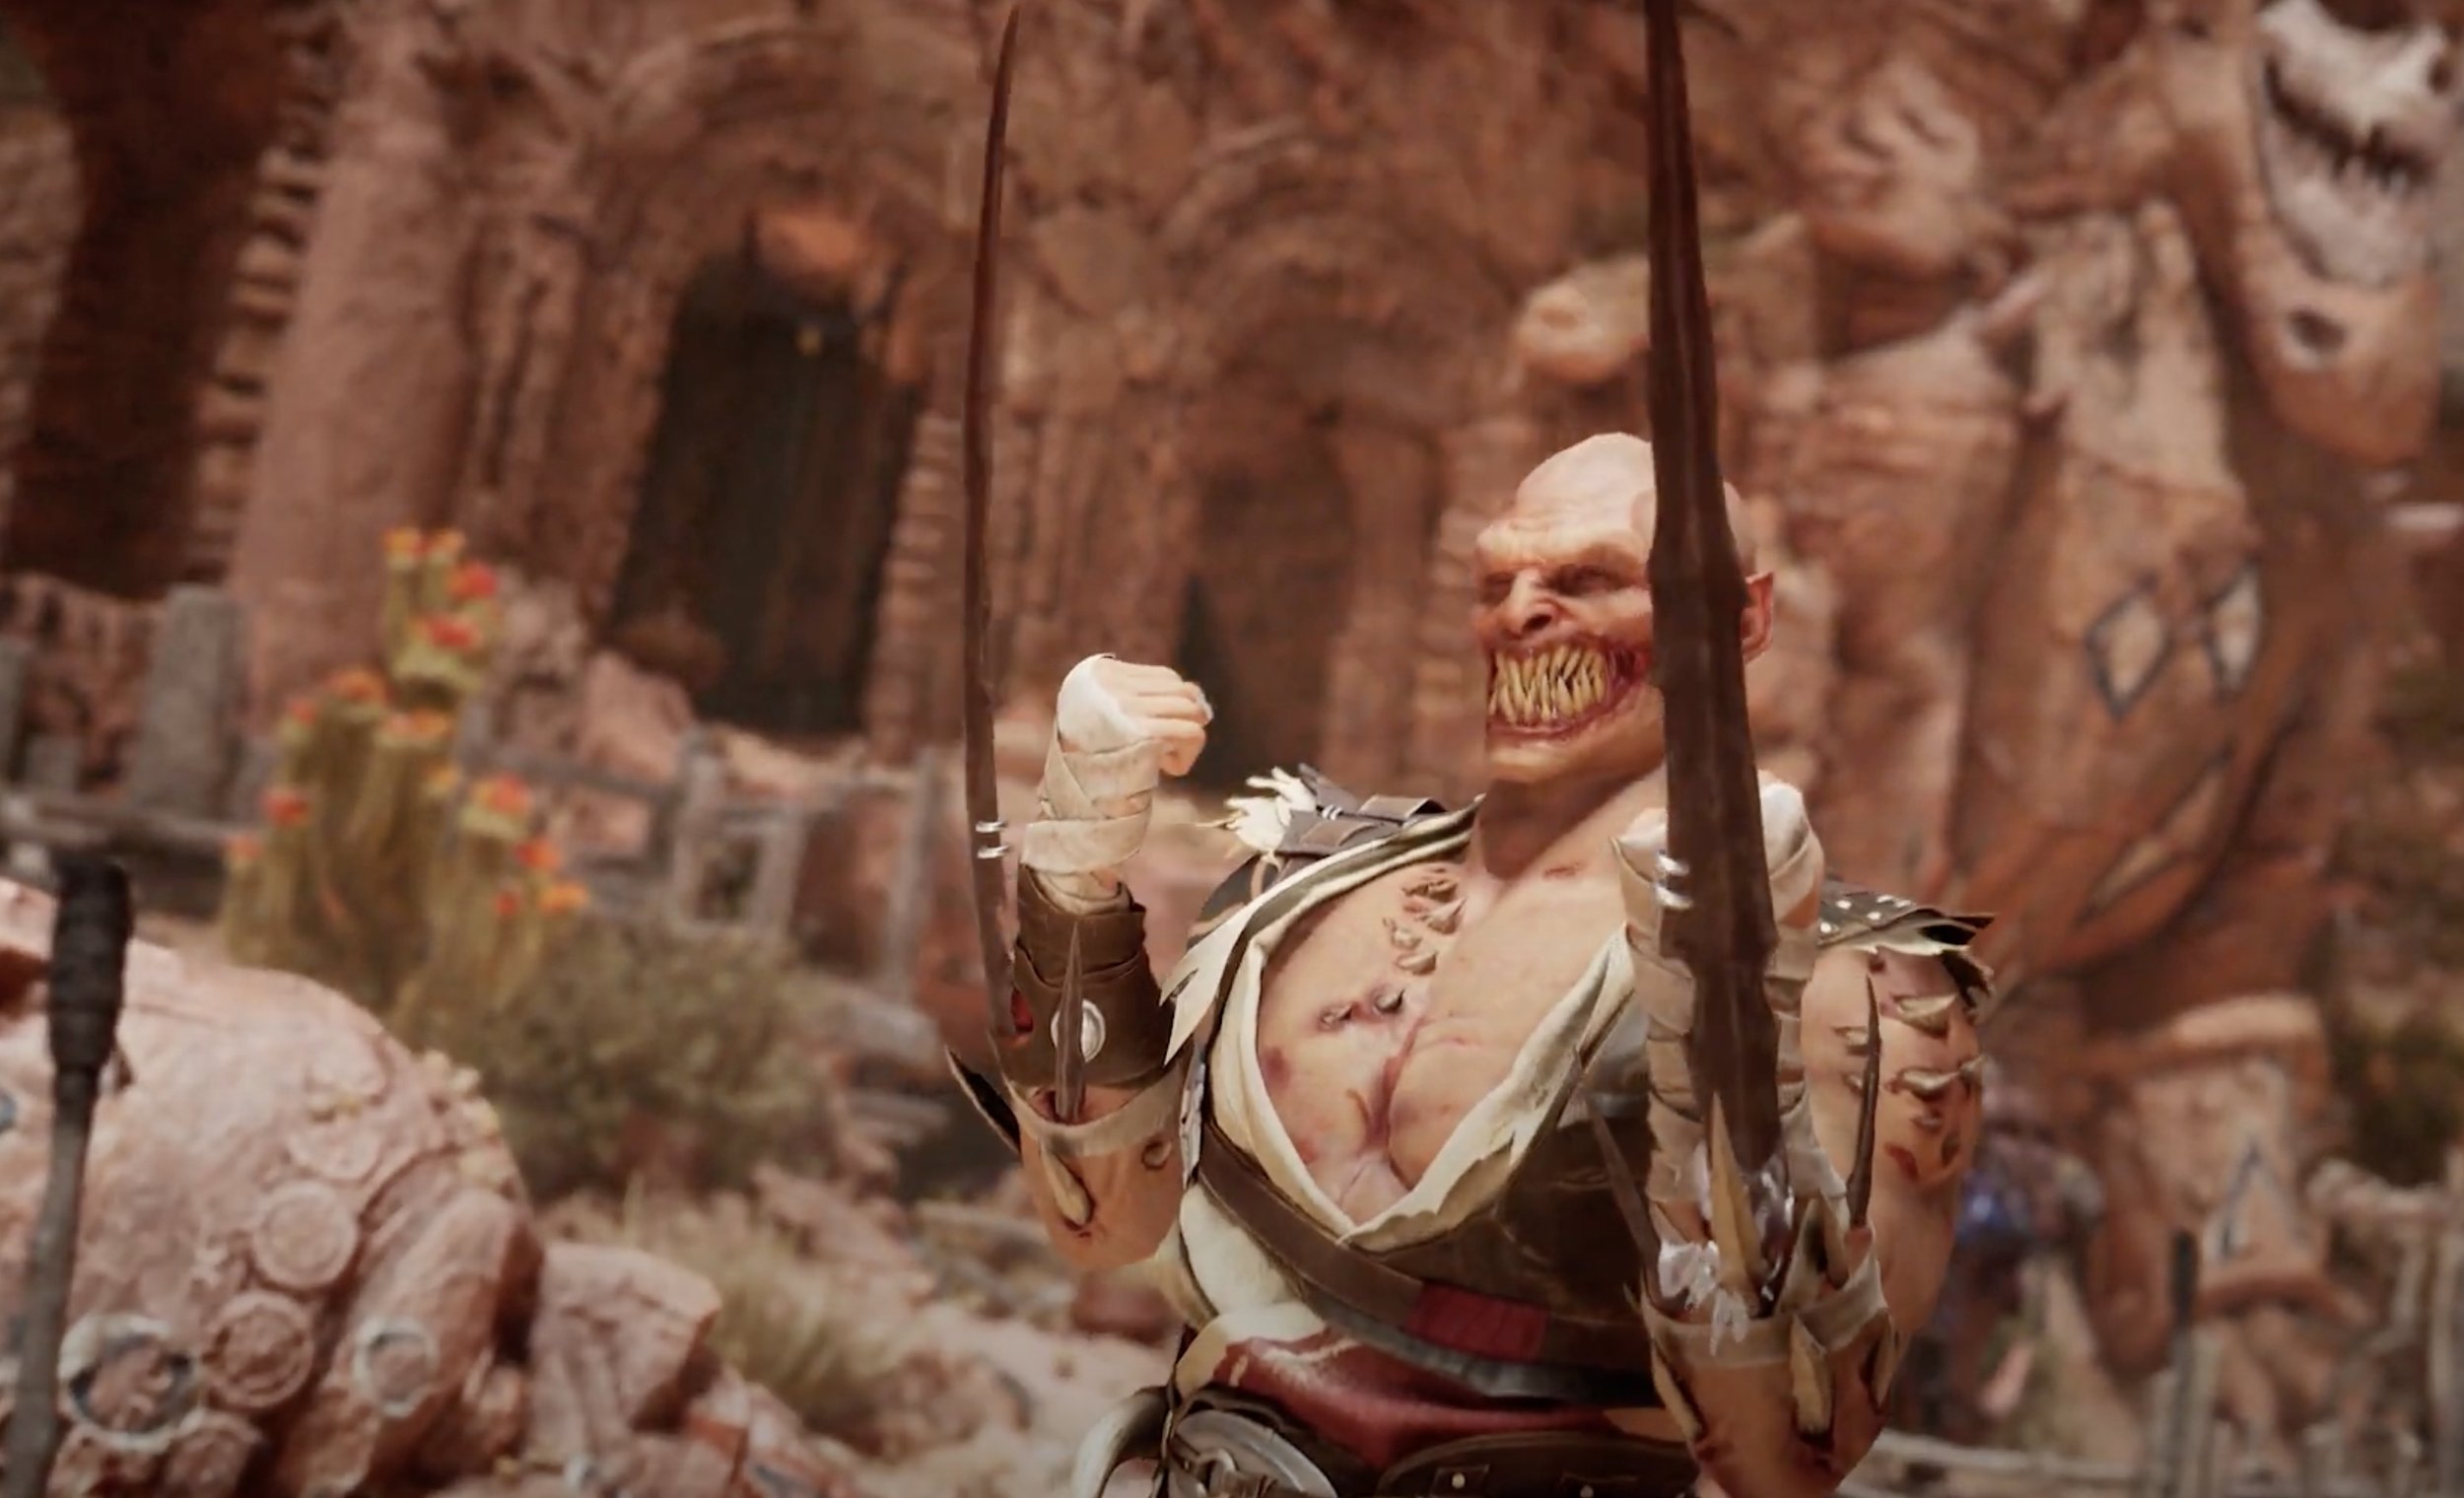 MORTAL KOMBAT 1 Launch Trailer Unleashes the Bloody and Violent